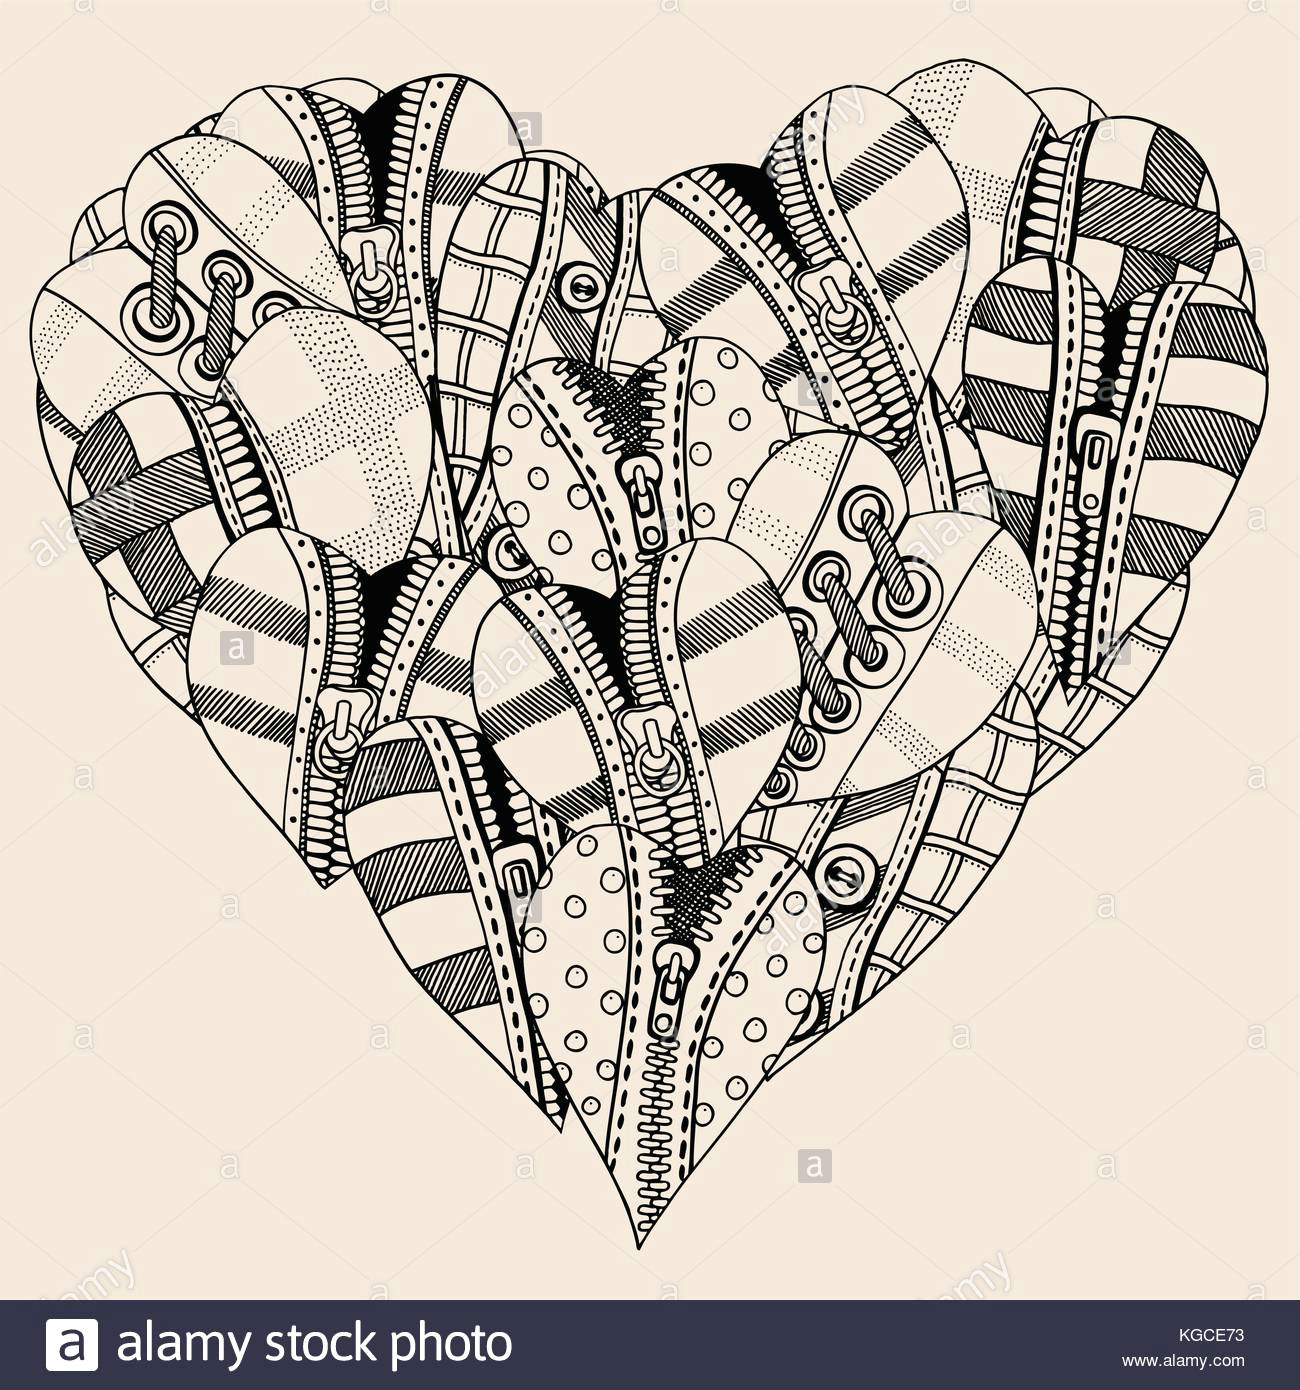 Drawing Of Heart Biology Big Heart Of Small Hand Drawn Hearts Background for Valentines Day